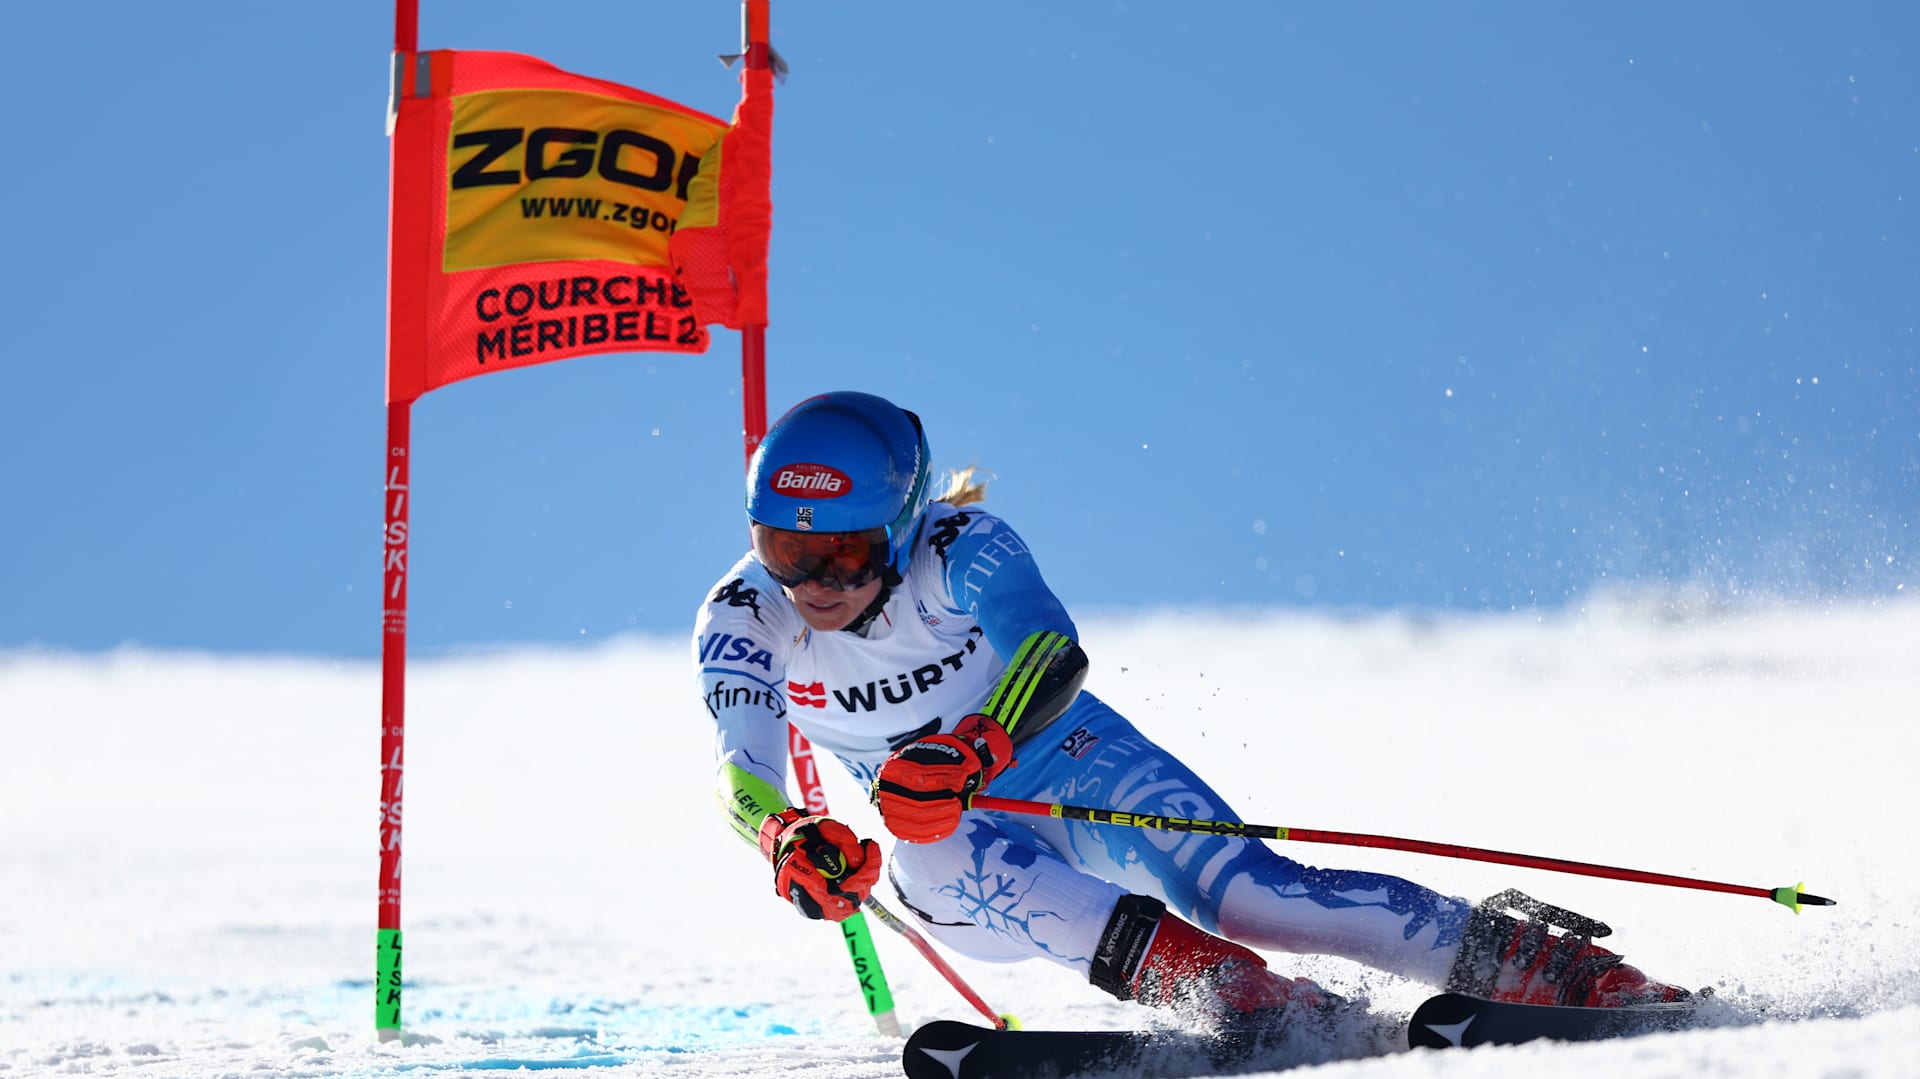 Mikaela Shiffrin wins seventh World Championships gold with giant slalom victory in Méribel